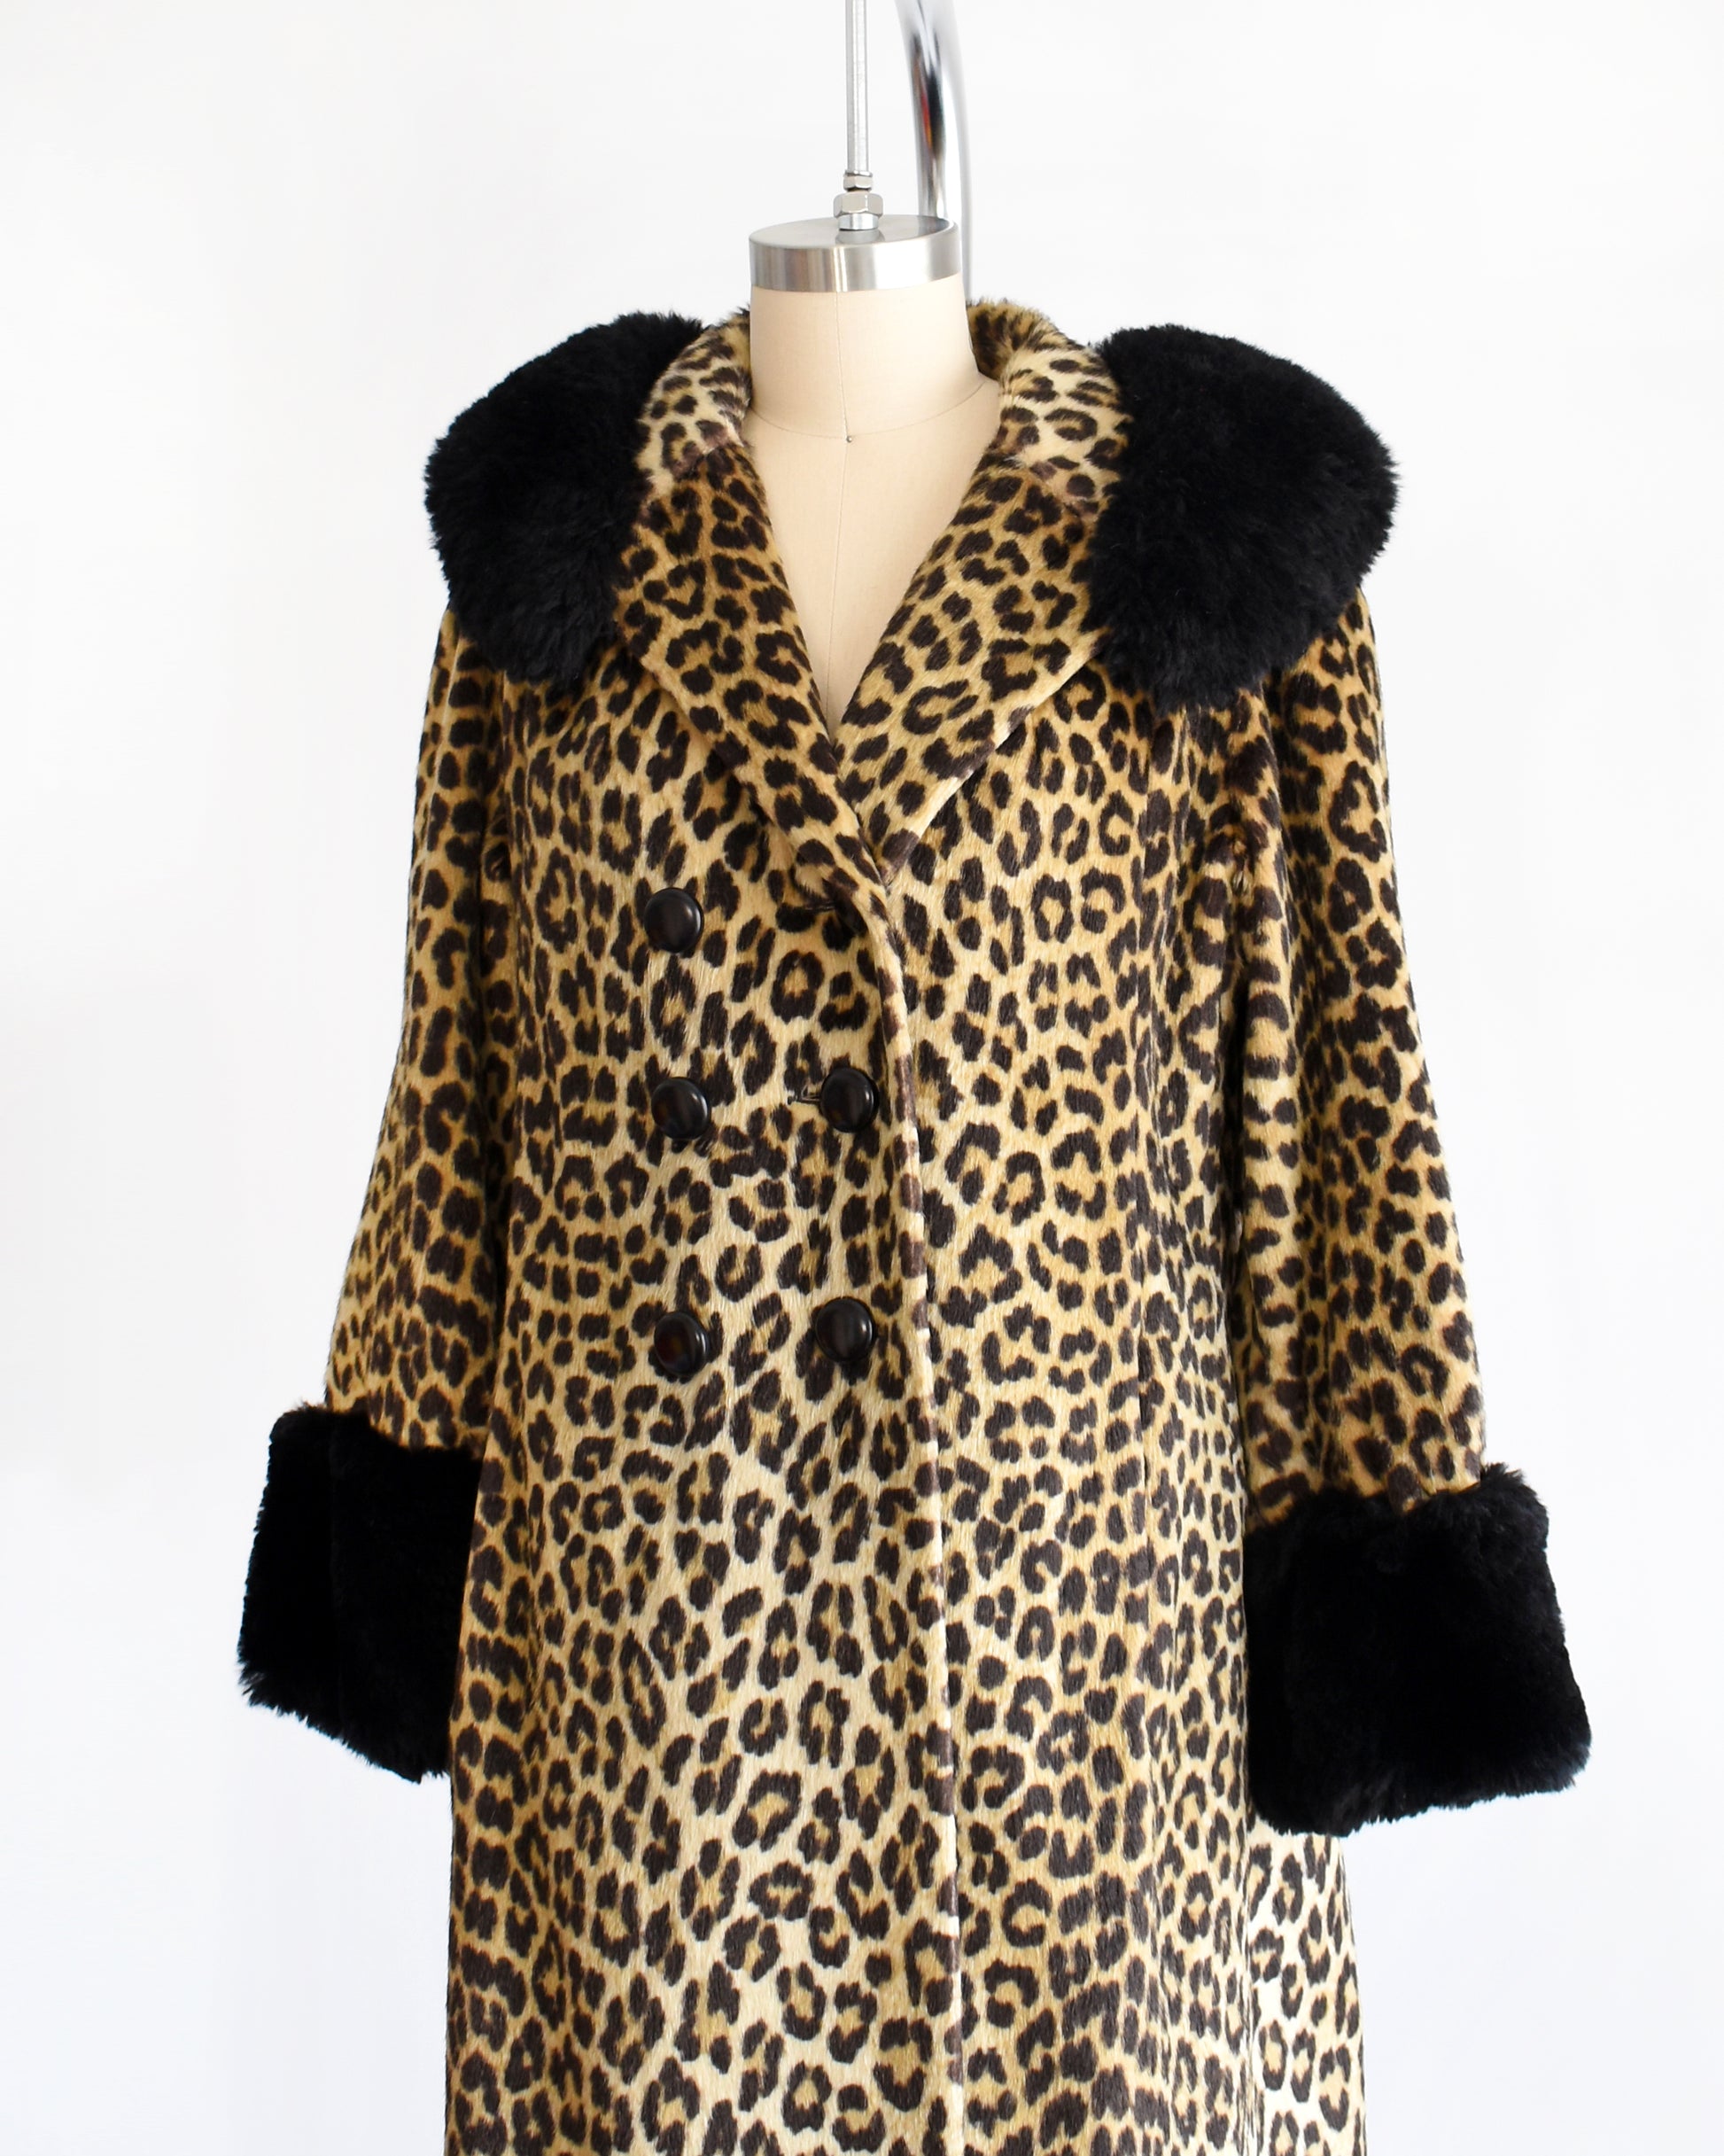 Side front view of a vintage 1960s faux fur leopard print coat. Black plush trim along the collar and on the cuffs. The top button is unbuttoned in this photo.